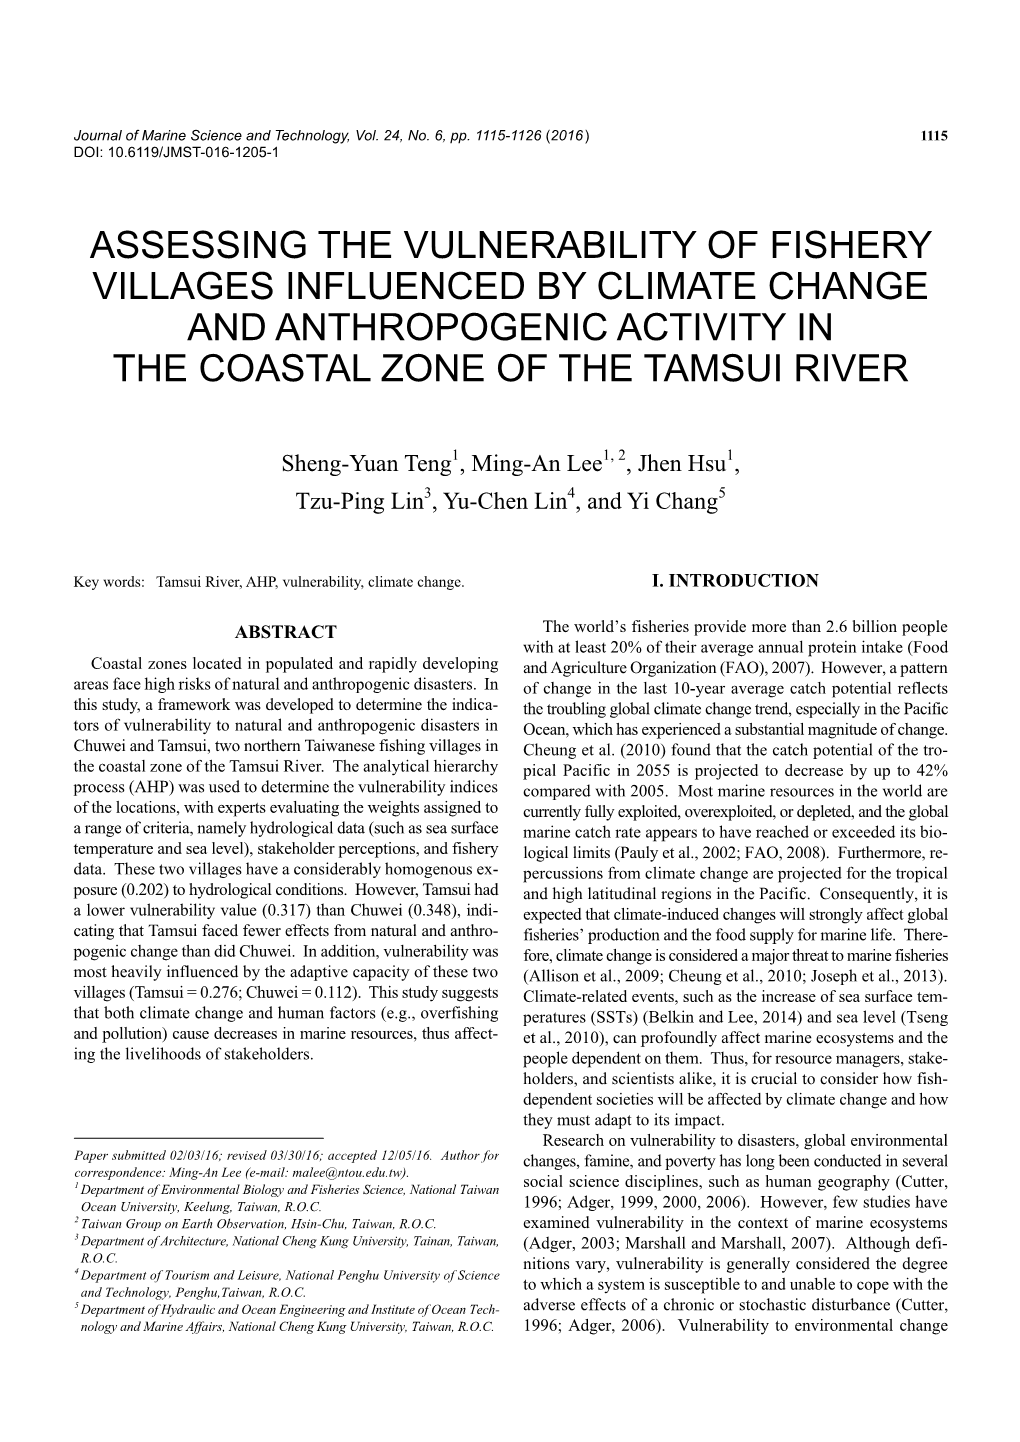 Assessing the Vulnerability of Fishery Villages Influenced by Climate Change and Anthropogenic Activity in the Coastal Zone of the Tamsui River